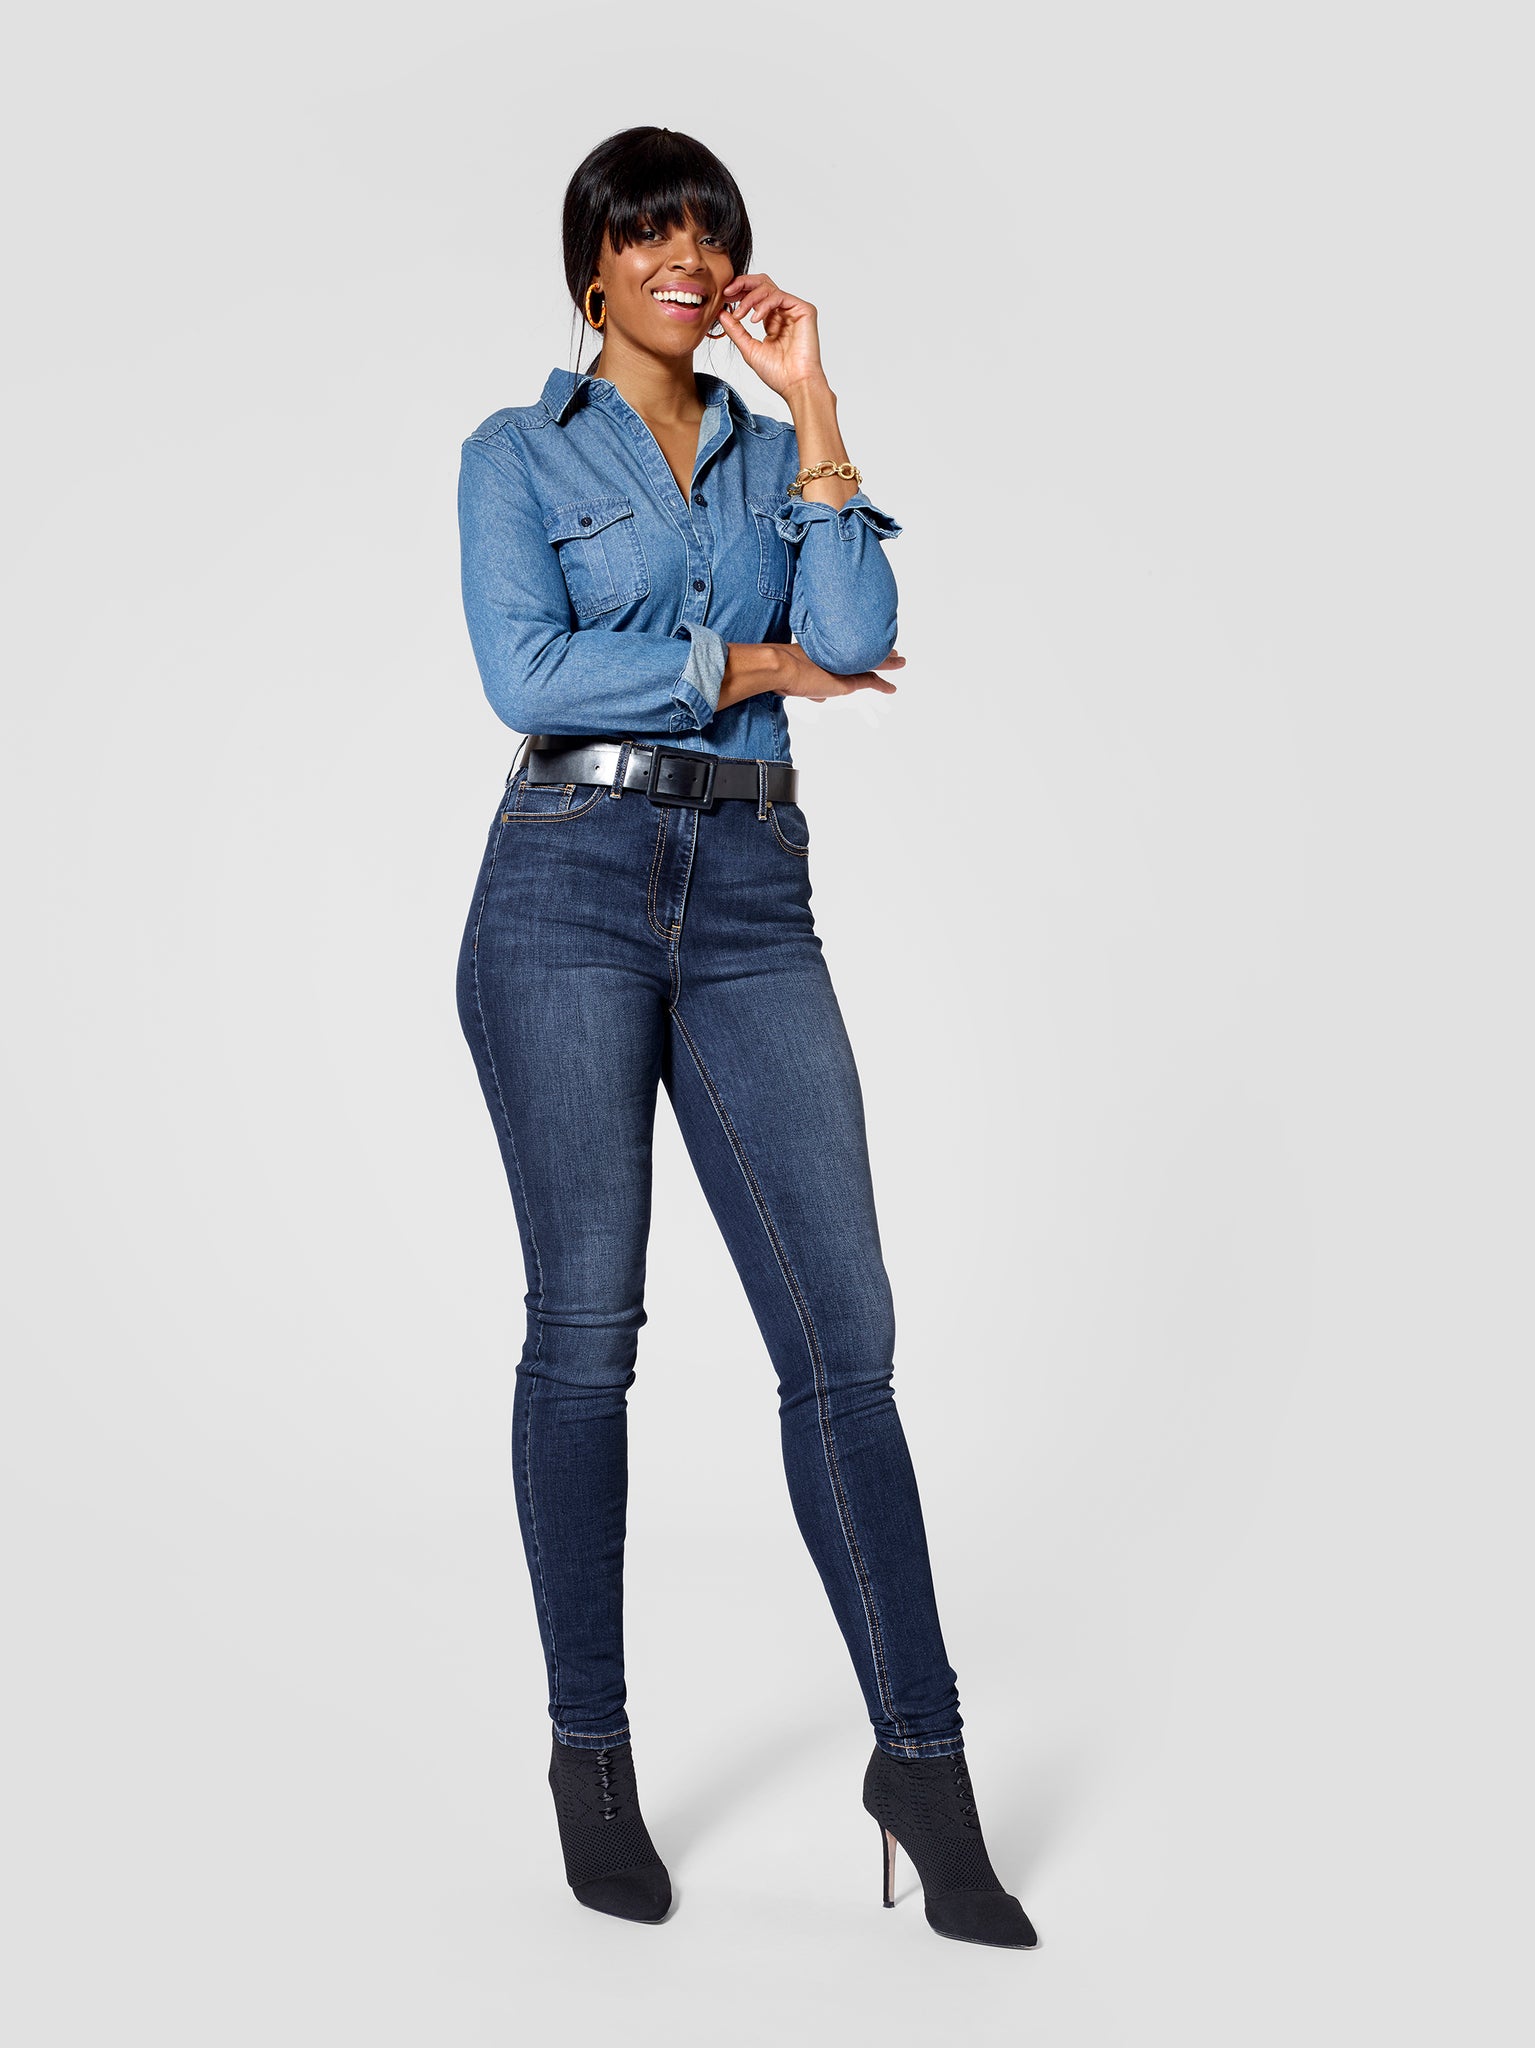 What To Wear With Skinny Jeans In 2023 - an indigo day